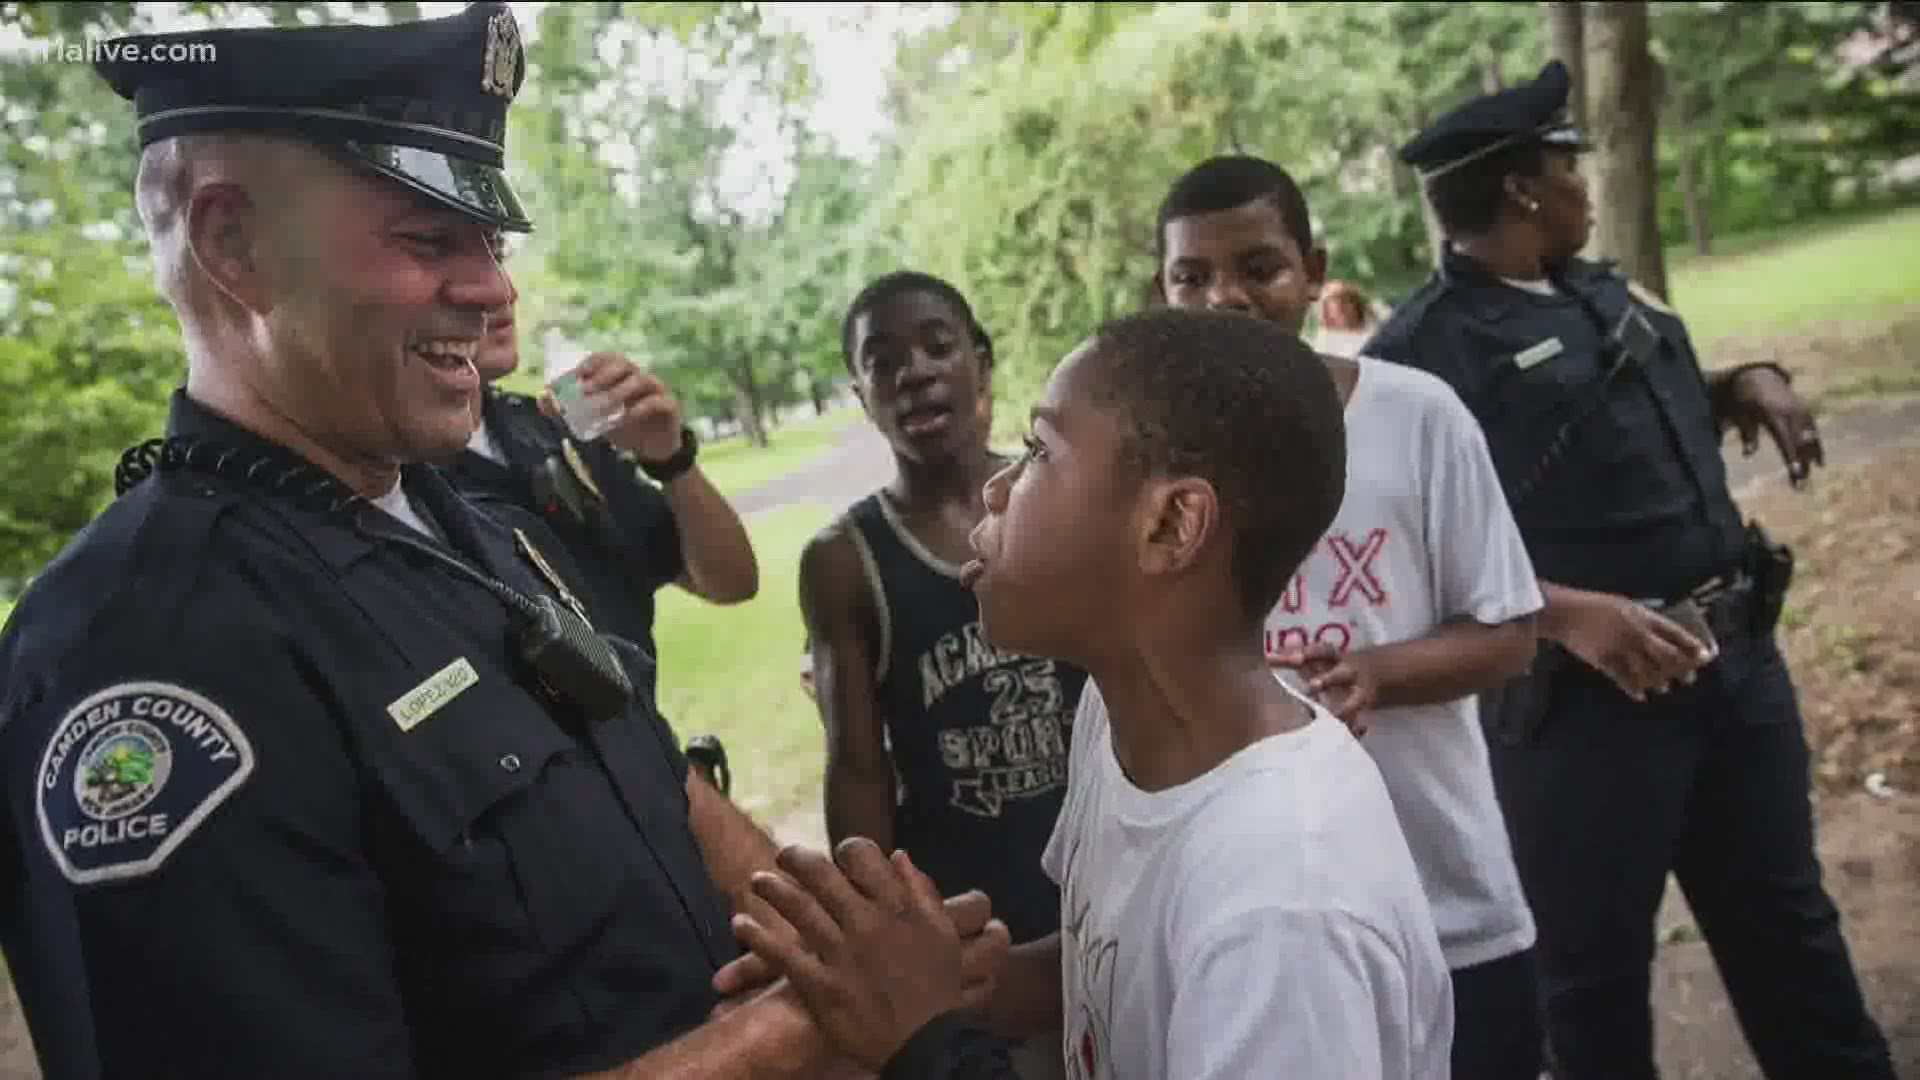 We looked at Camden, N.J. and other cities where "community policing" has had success.